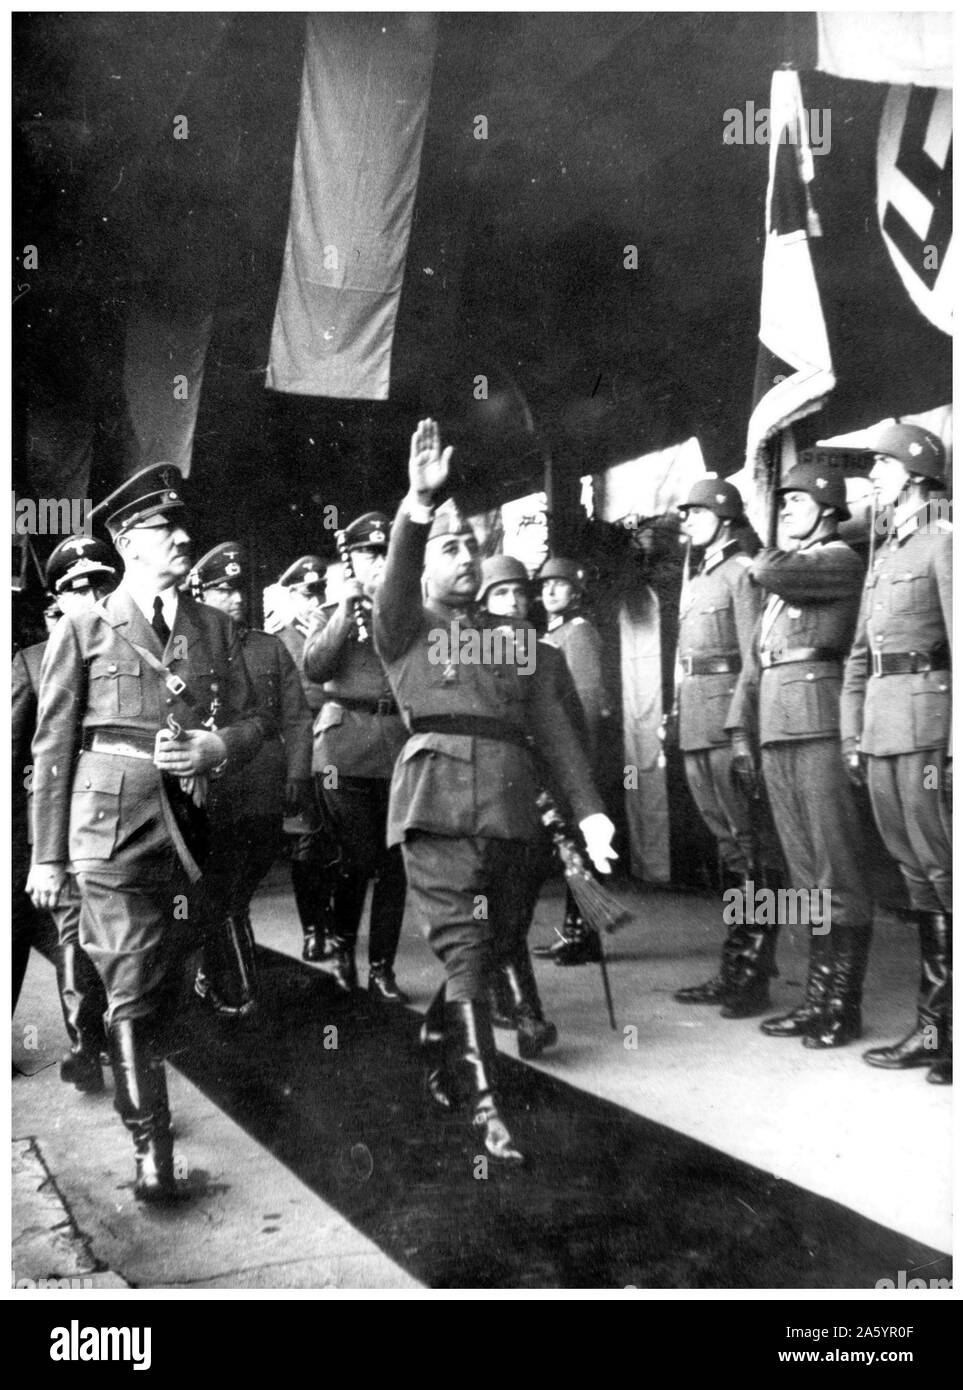 In October 1940, Francisco Franco the Spanish leader, met with German leader, Adolf Hitler, in southern France (Hendaye) to discuss having Spain participate in World War II Stock Photo